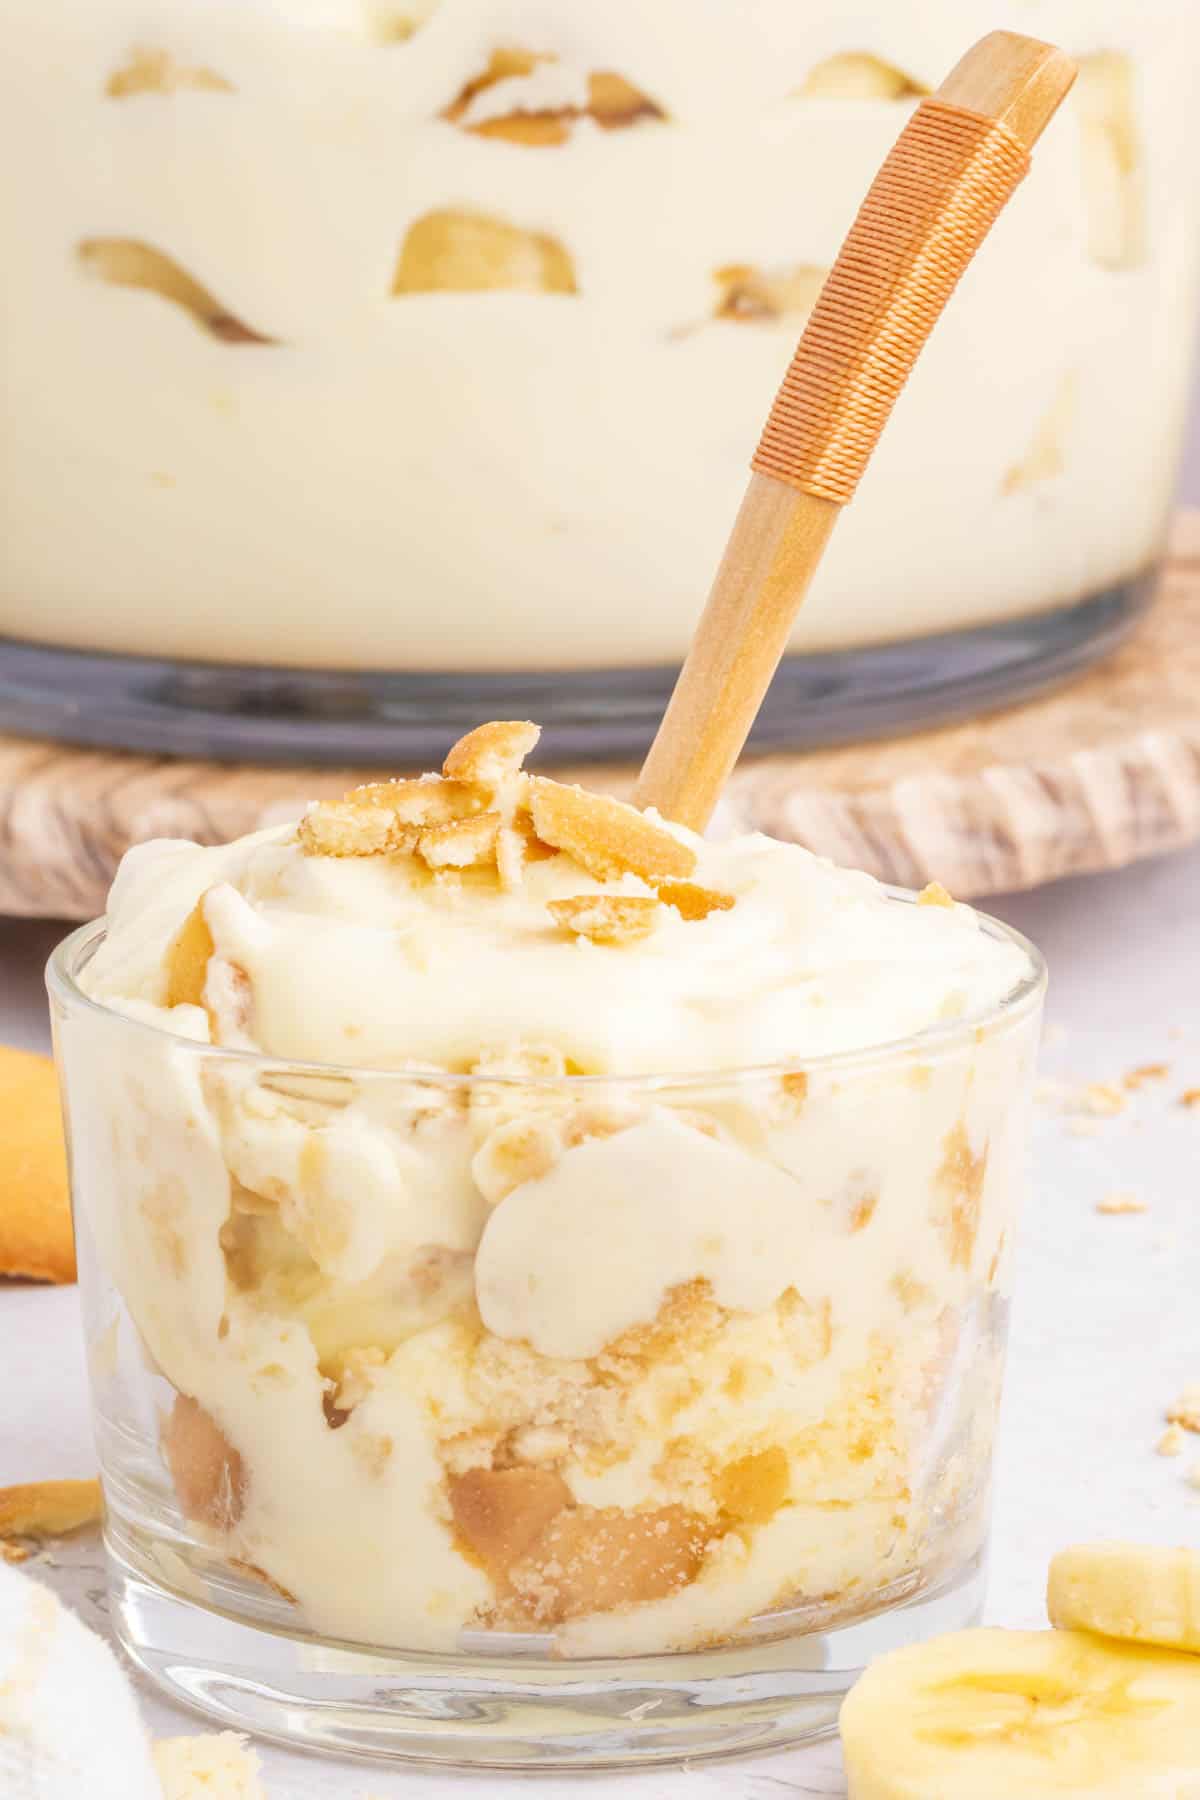 A clear dessert cup filled with banana pudding with a wooden spoon in it.